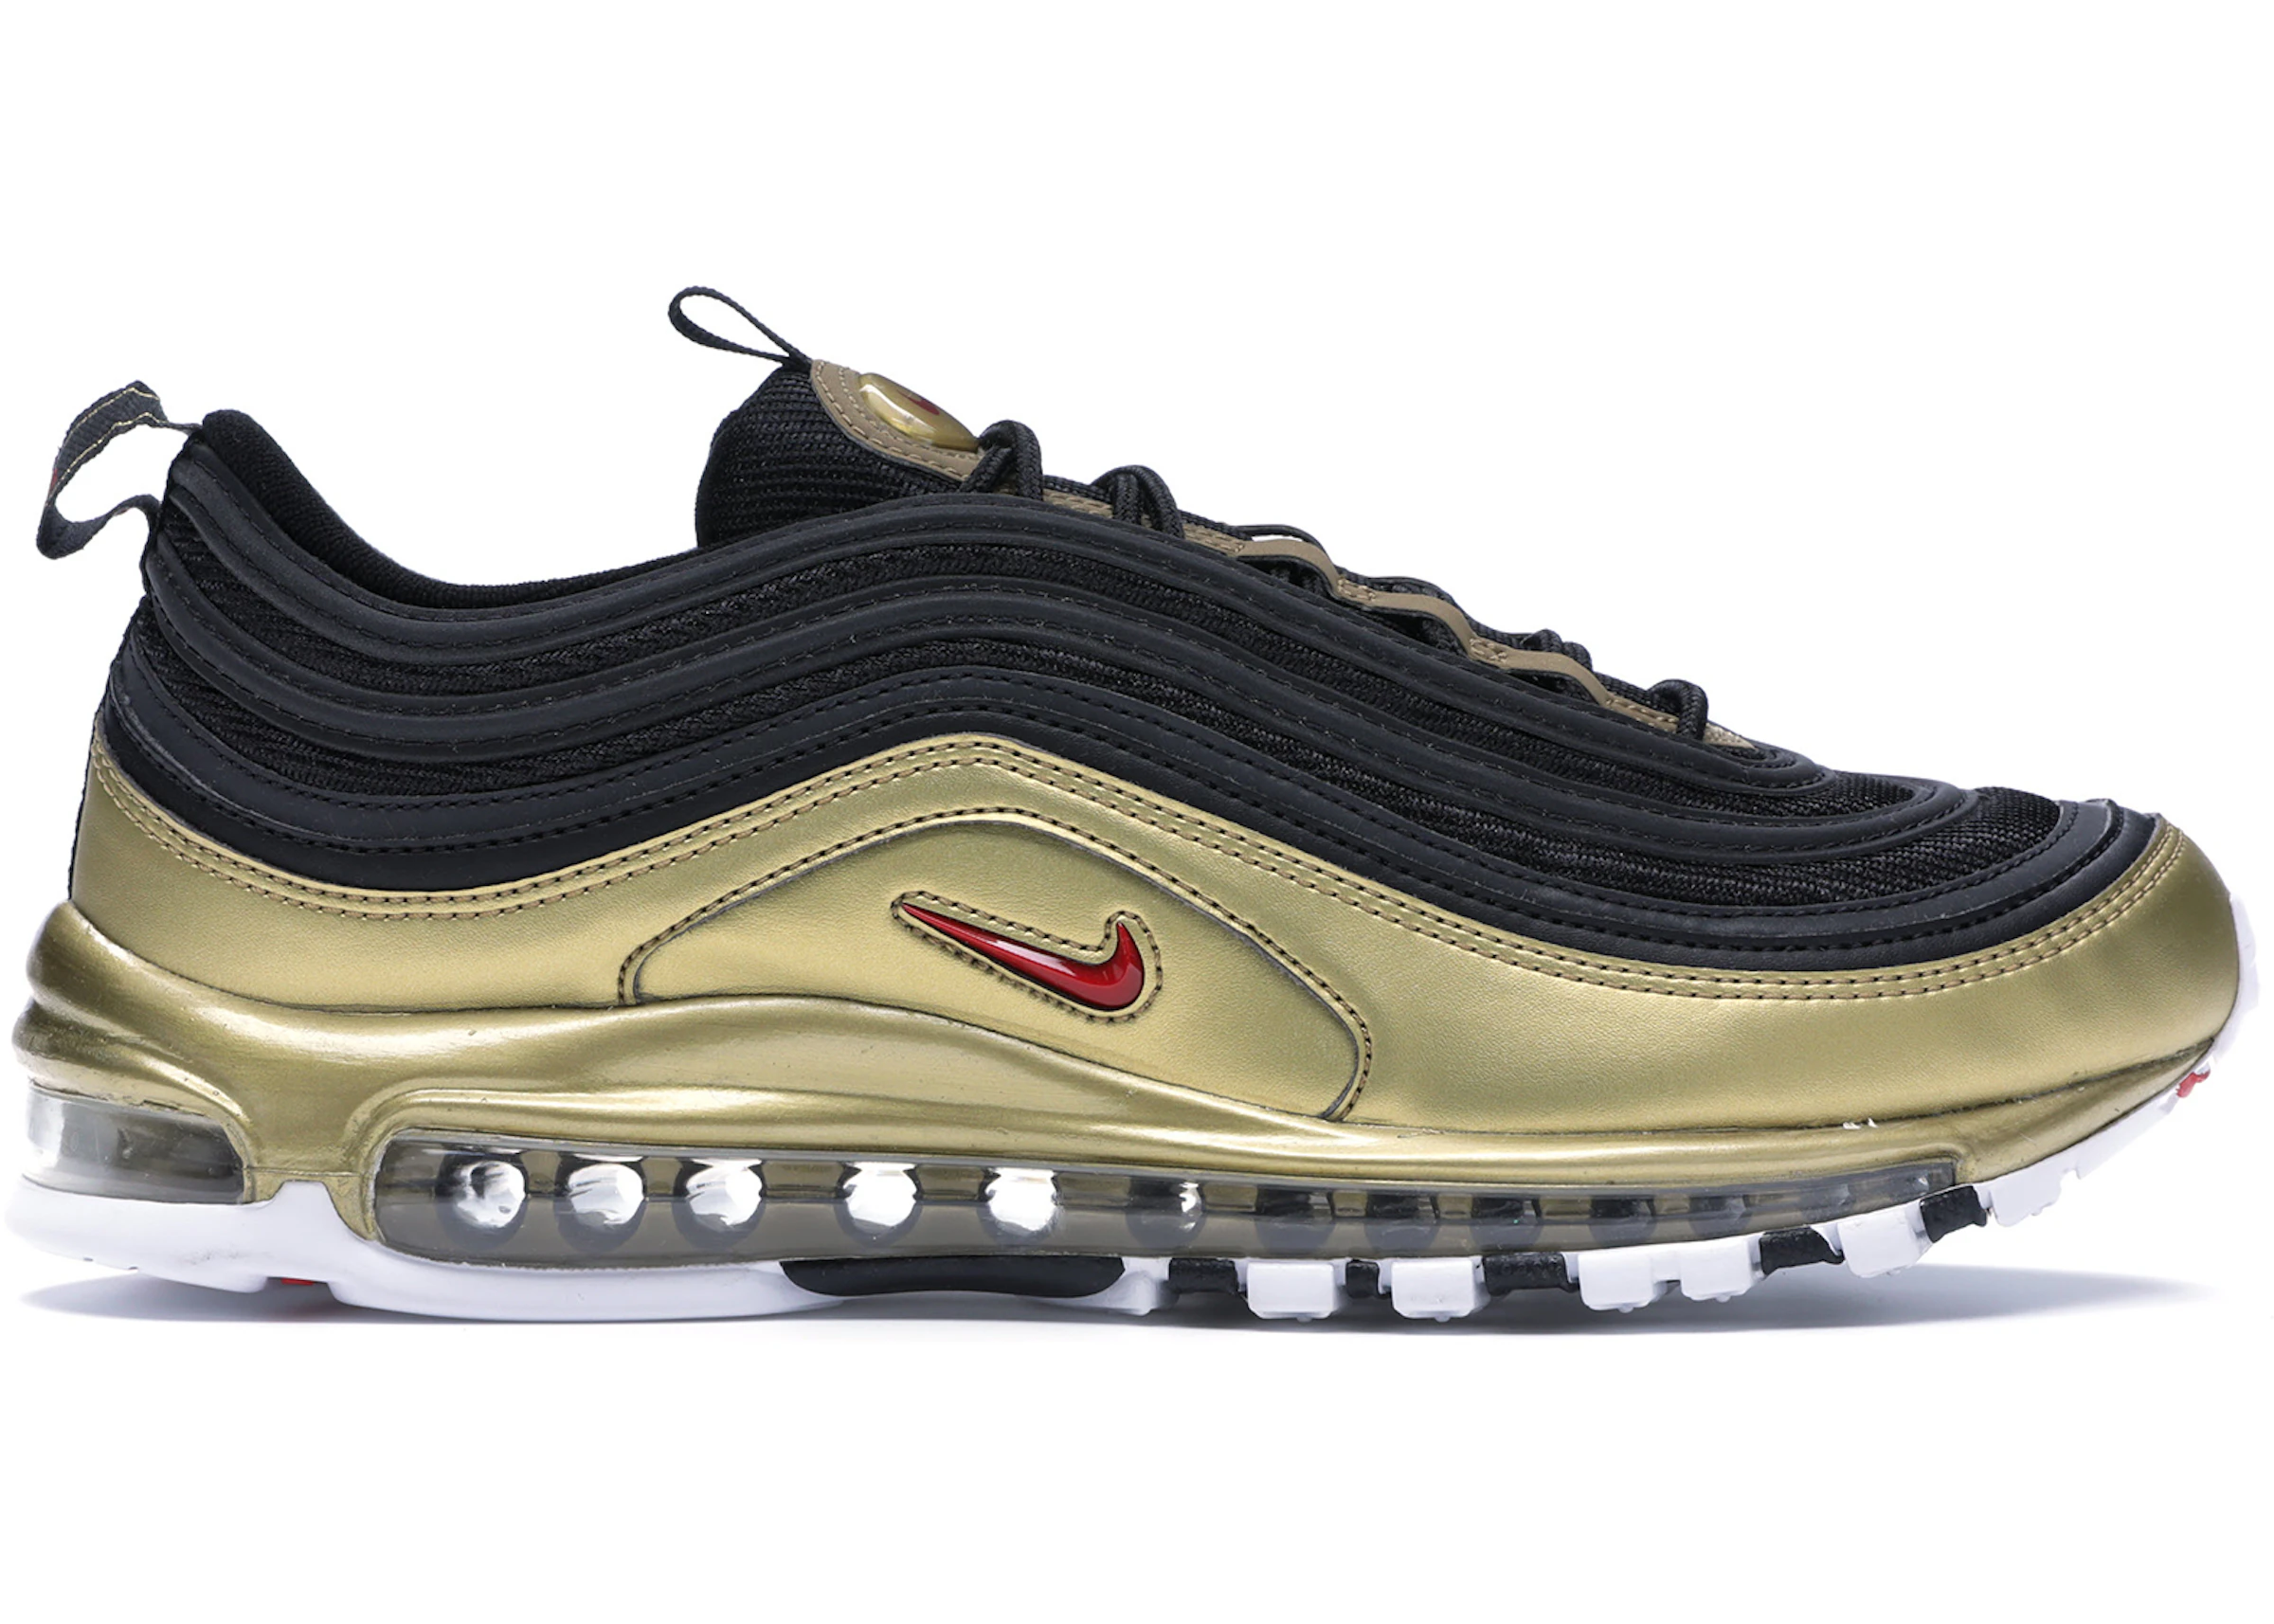 Disguised initial stomach ache Nike Air Max 97 Black Metallic Gold - AT5458-002 - US